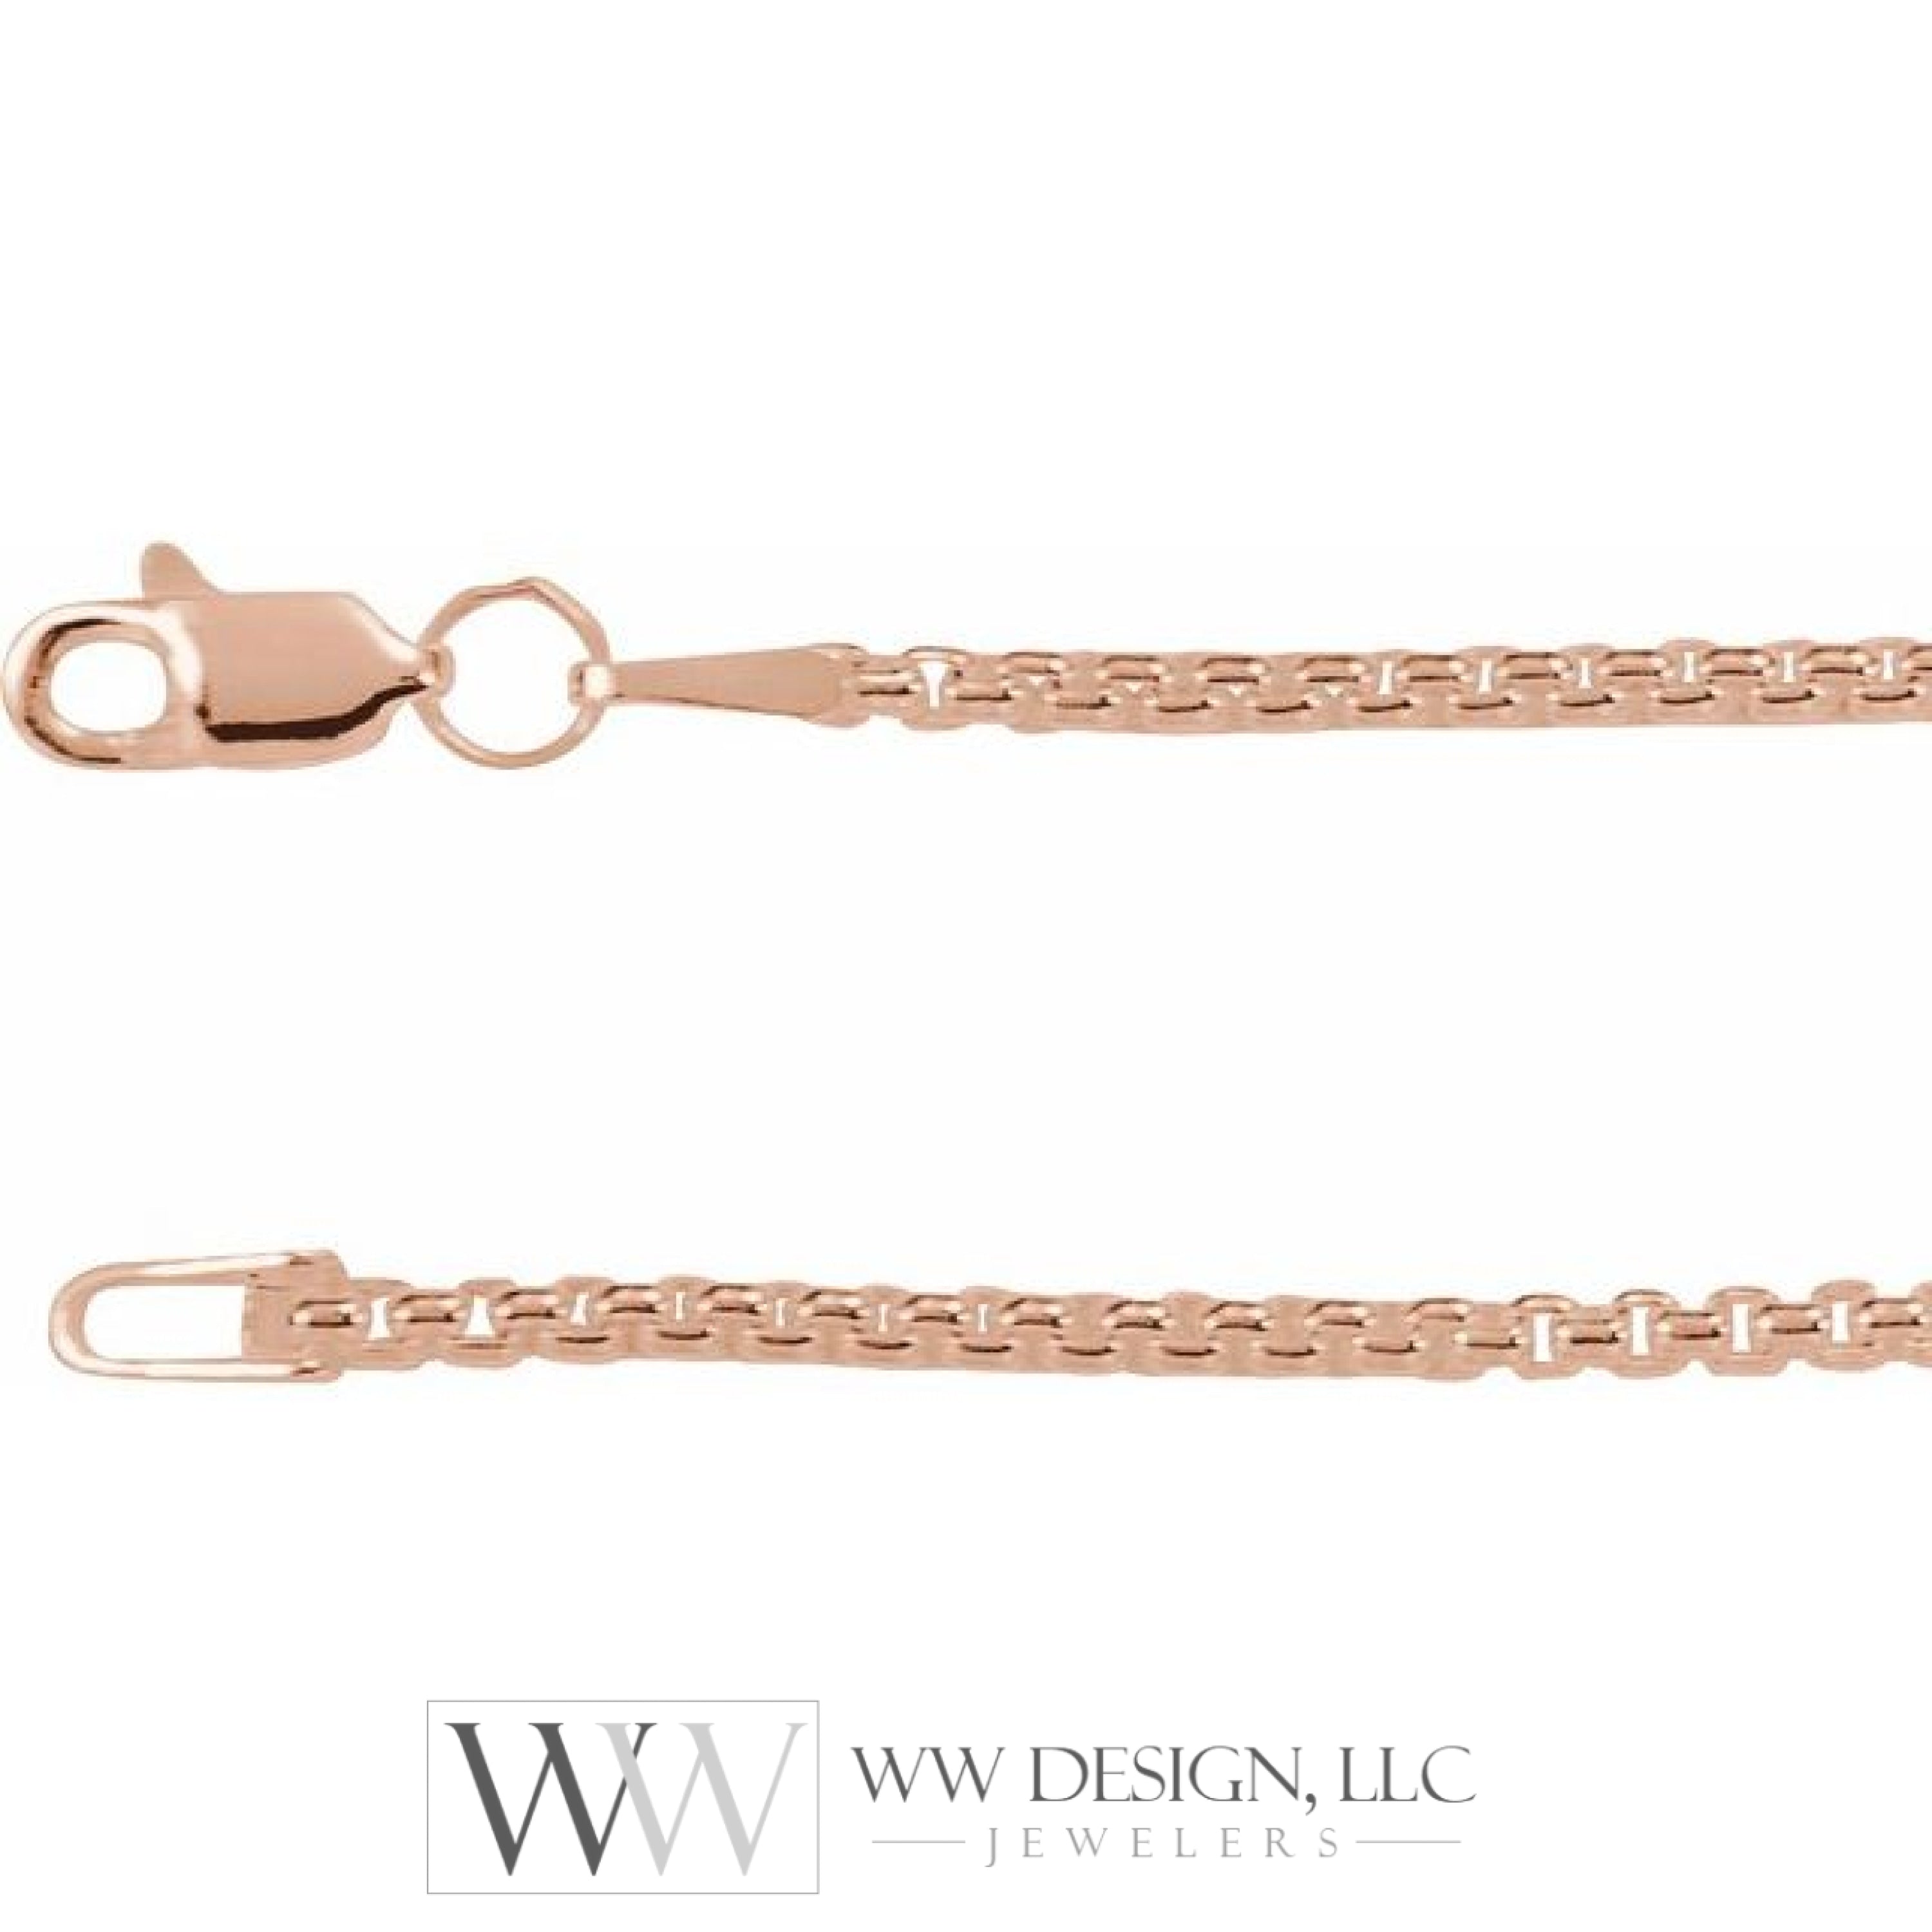 1.8mm Rounded Box Chain Bracelet or Necklace - 14k Gold (Y, W, R), or Sterling Silver